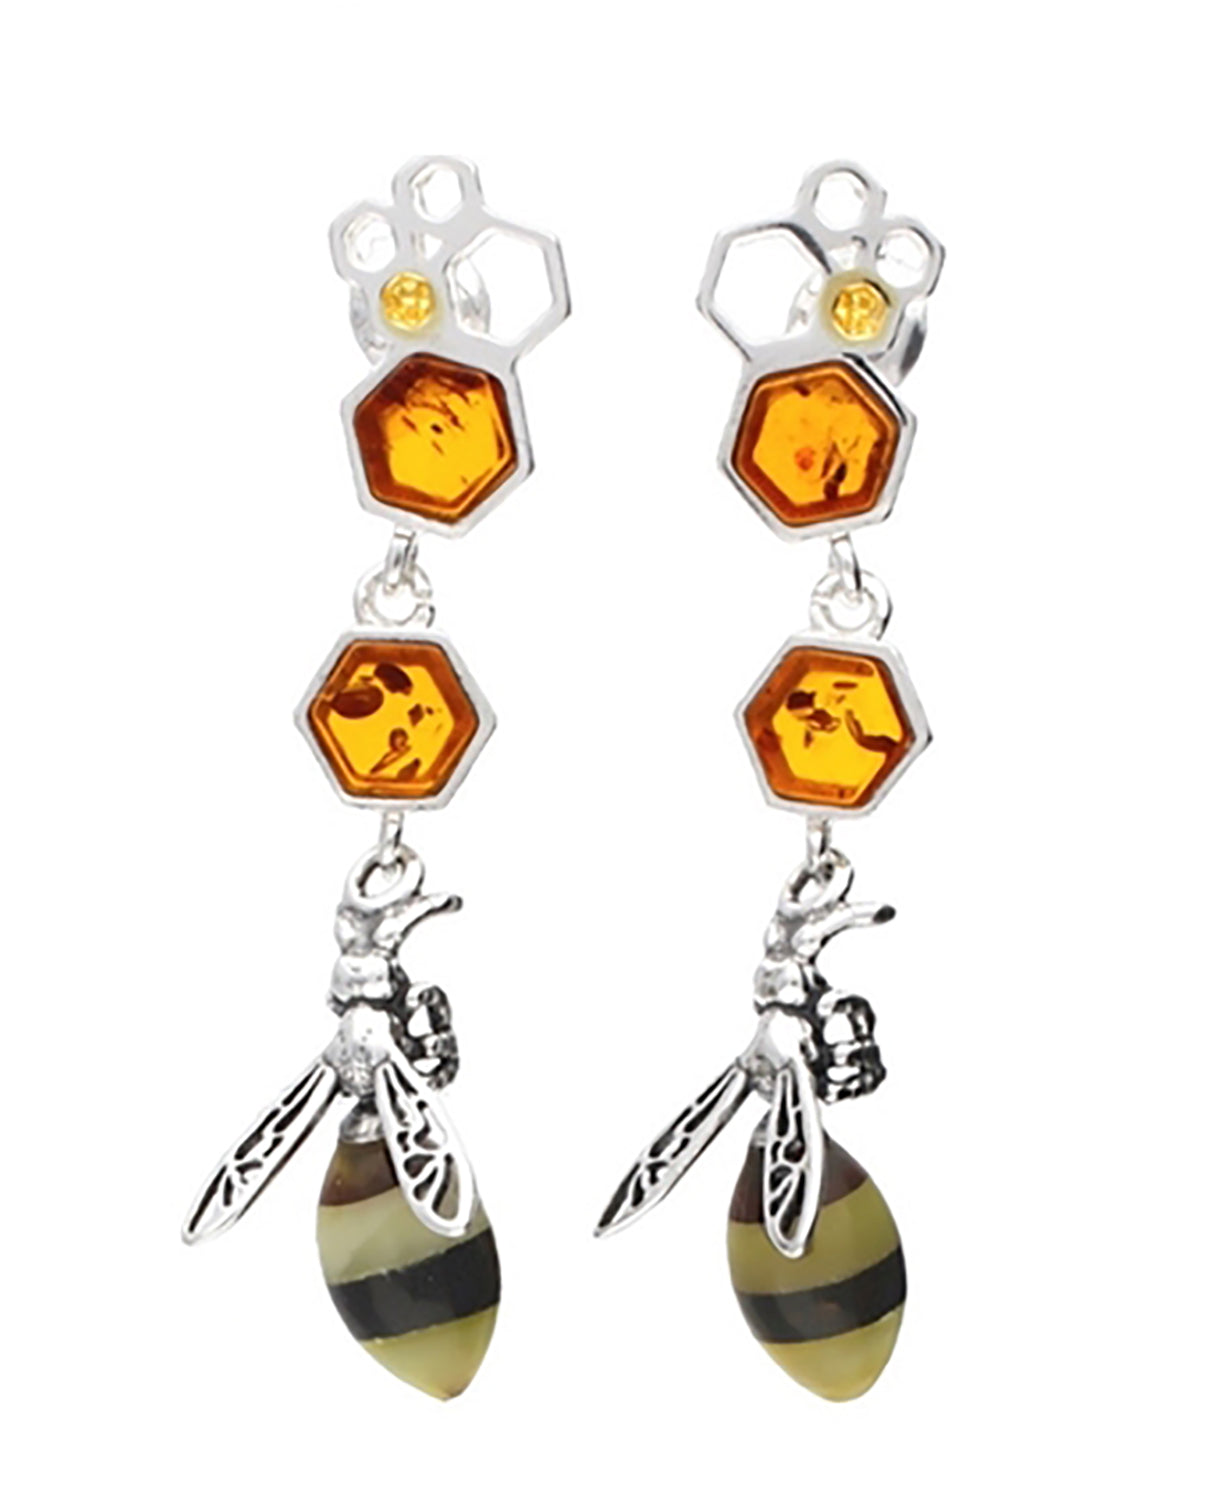 Genuine Baltic Amber Bee Earring - 925 Sterling Silver